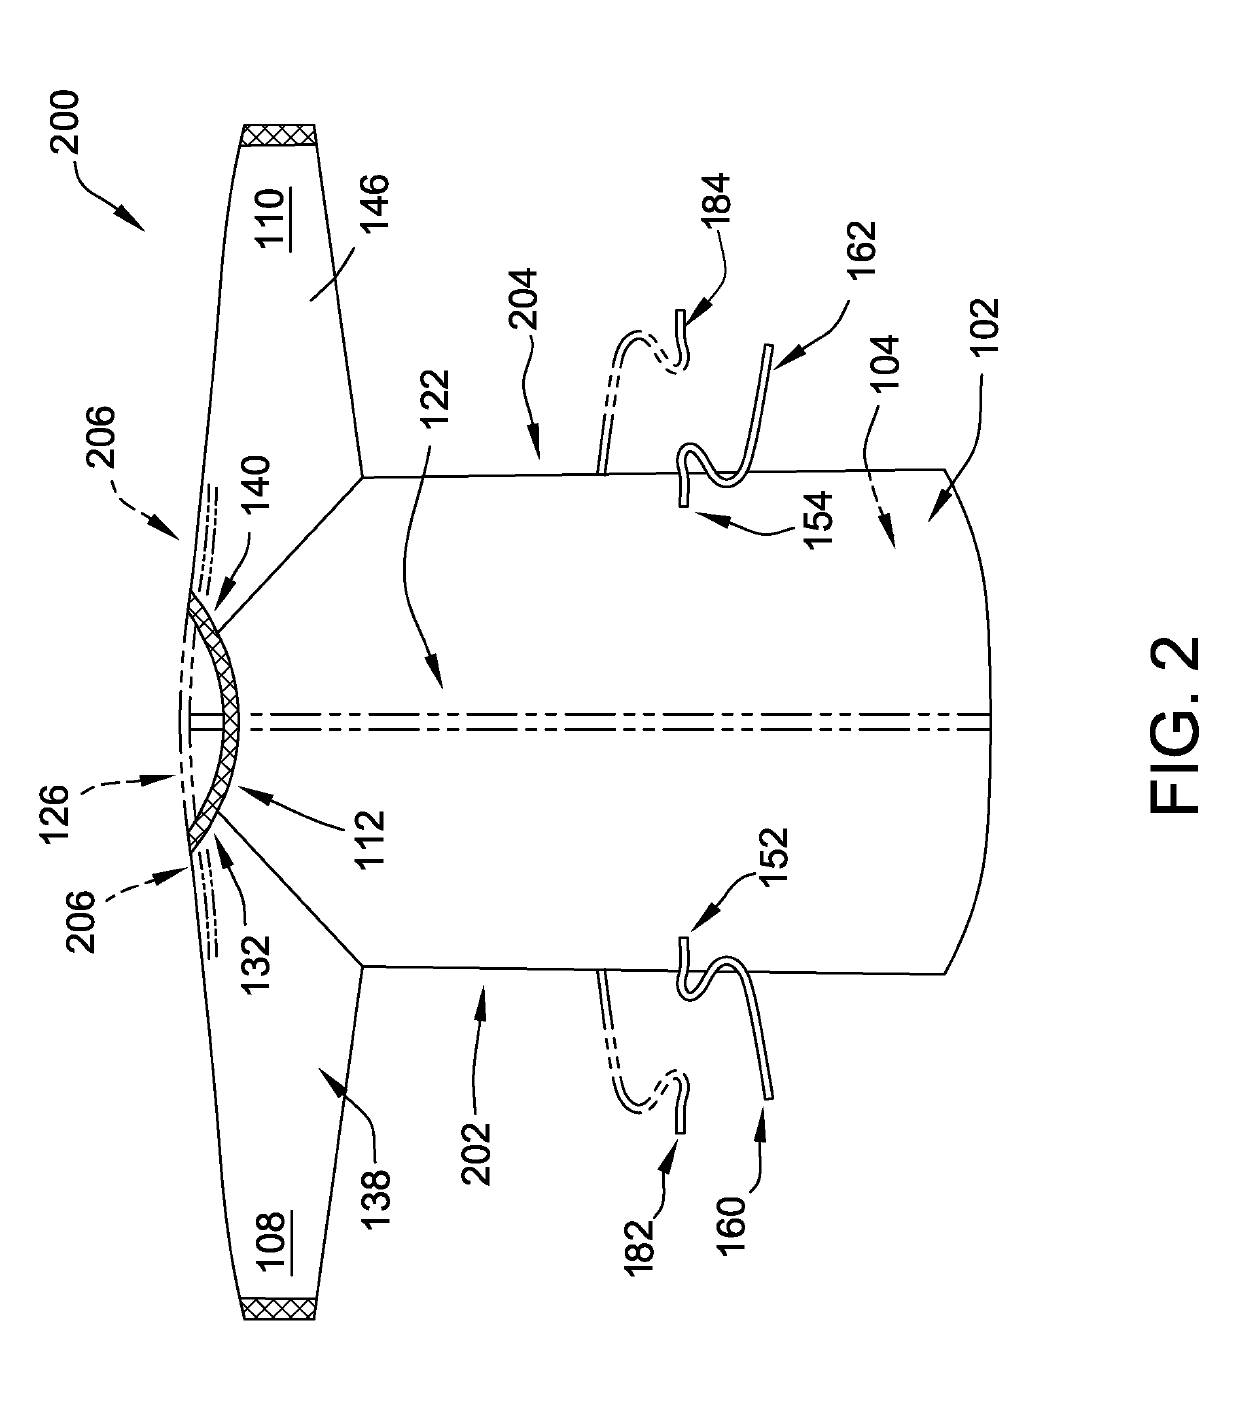 Over-the-head disposable contact isolation gown and method for making the same